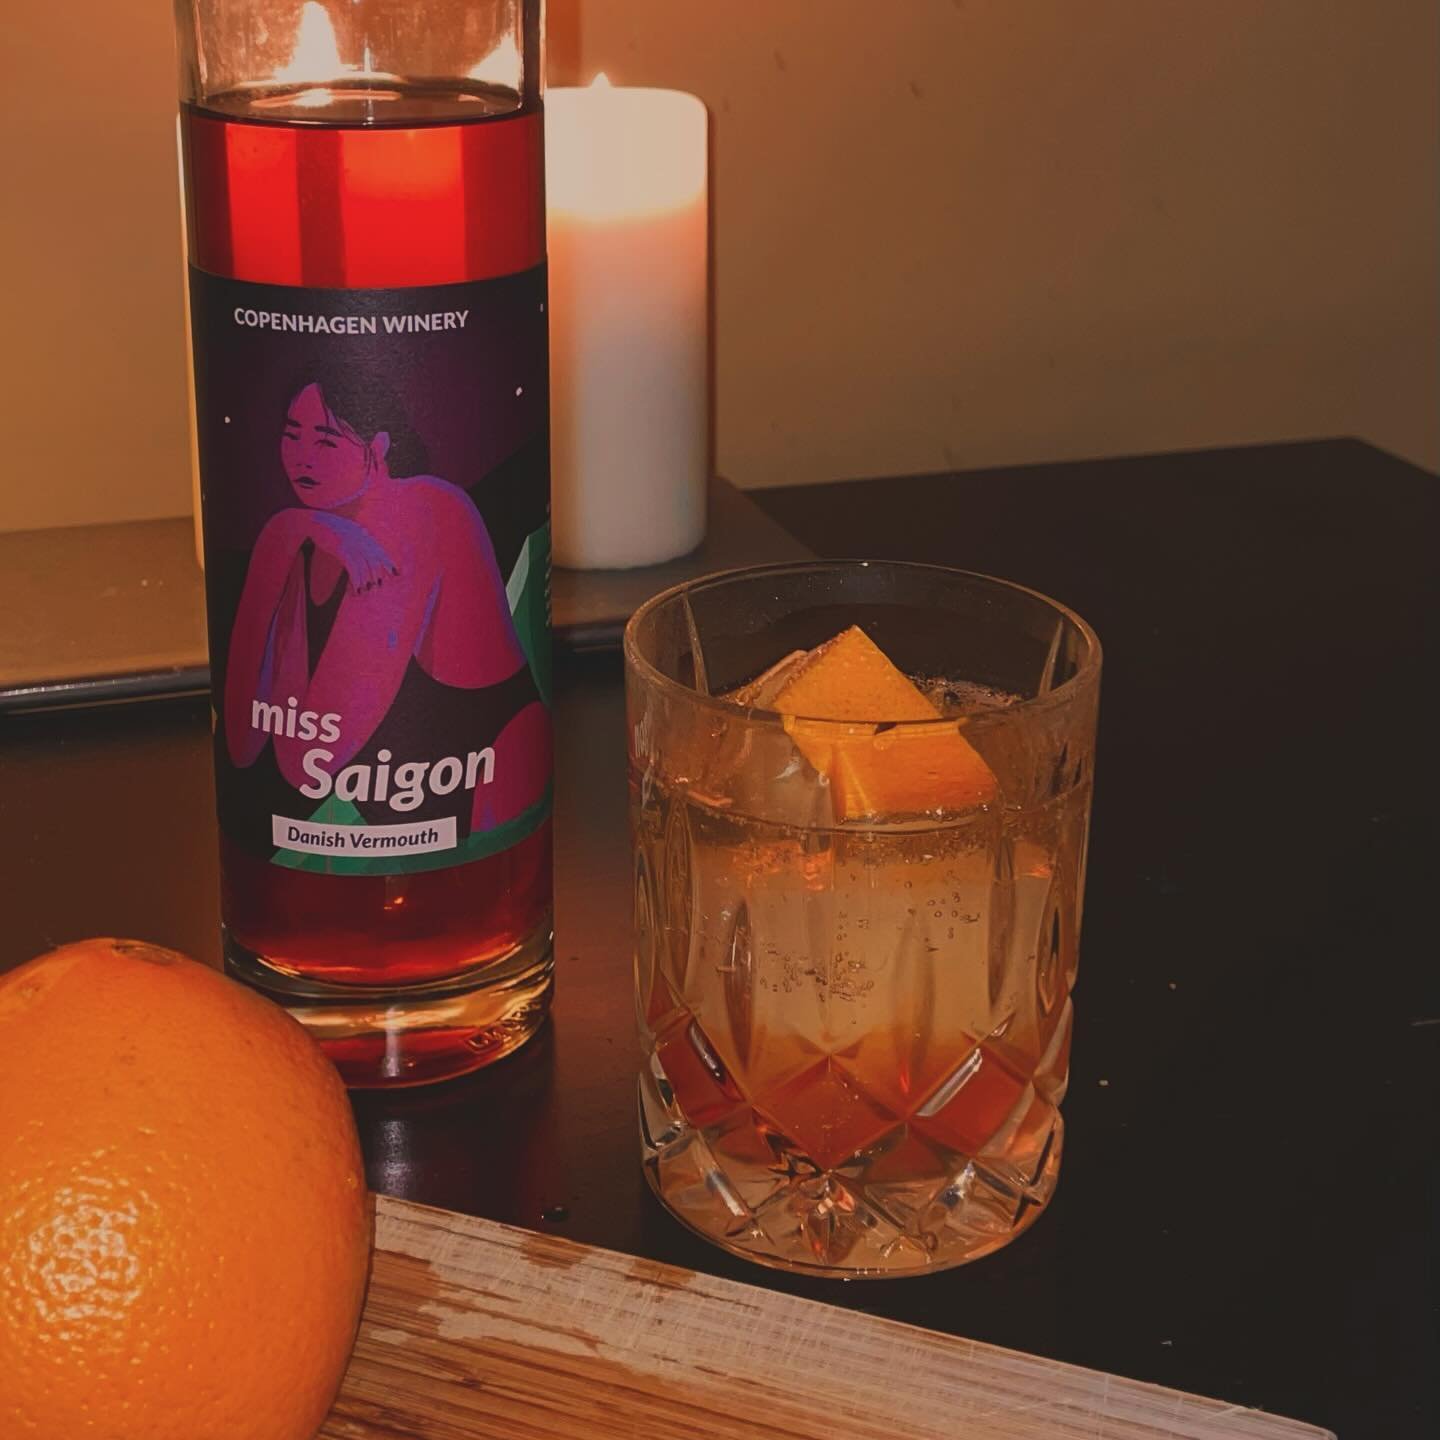 Vermouth Tonic is our absolute favorite drink this Christmas 😍 
It&rsquo;s easy to make and deliciously refreshing with just a hint of bitterness 👌

All you need to make it is: 

1 part Miss Saigon Vermouth
1 part tonic
1 slice of orange

Made with